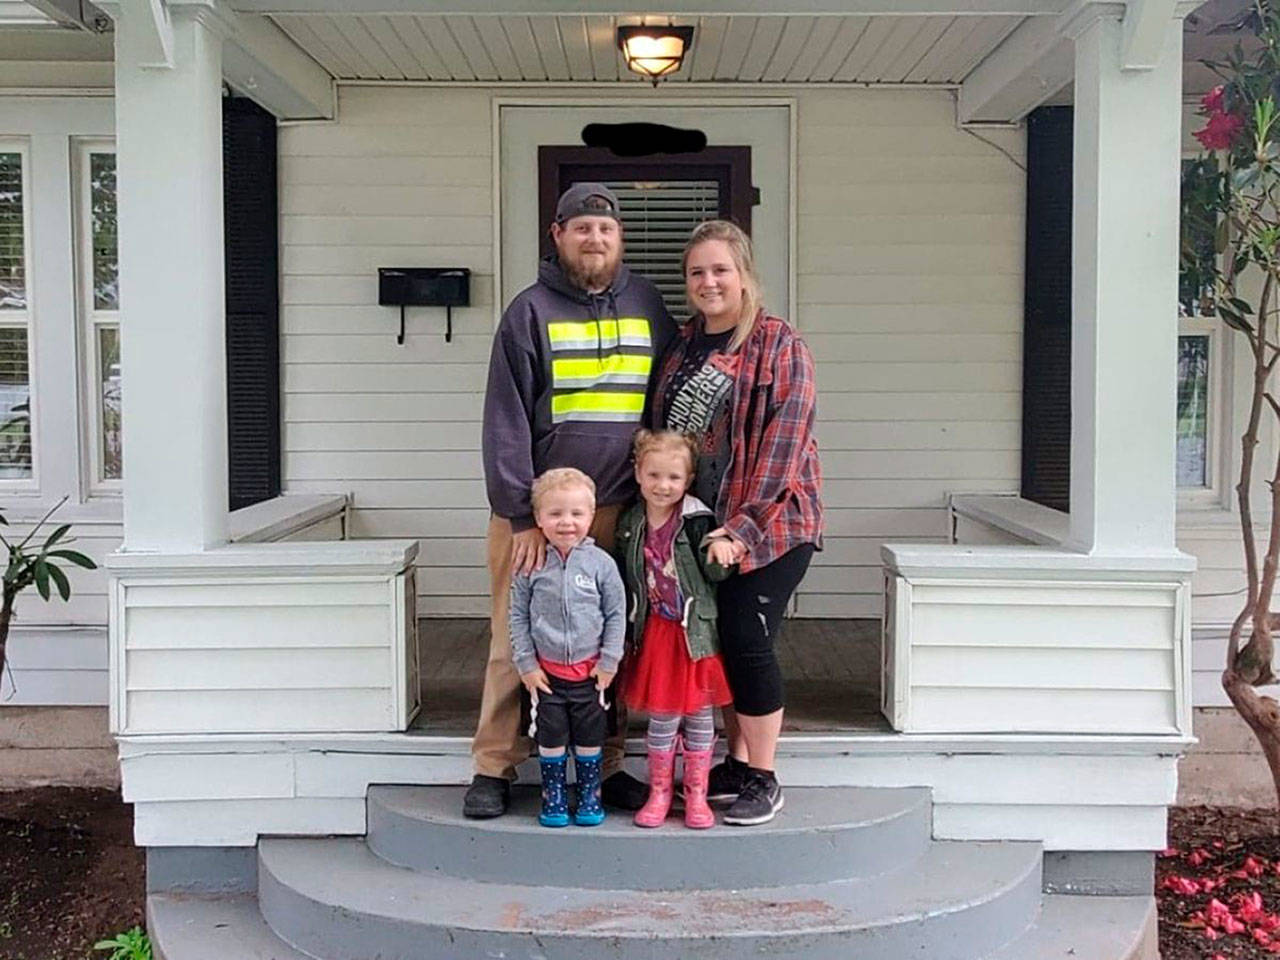 Luke, Sarah, Remi, and Ryker Lenihan in front of their new home. Contributed photo